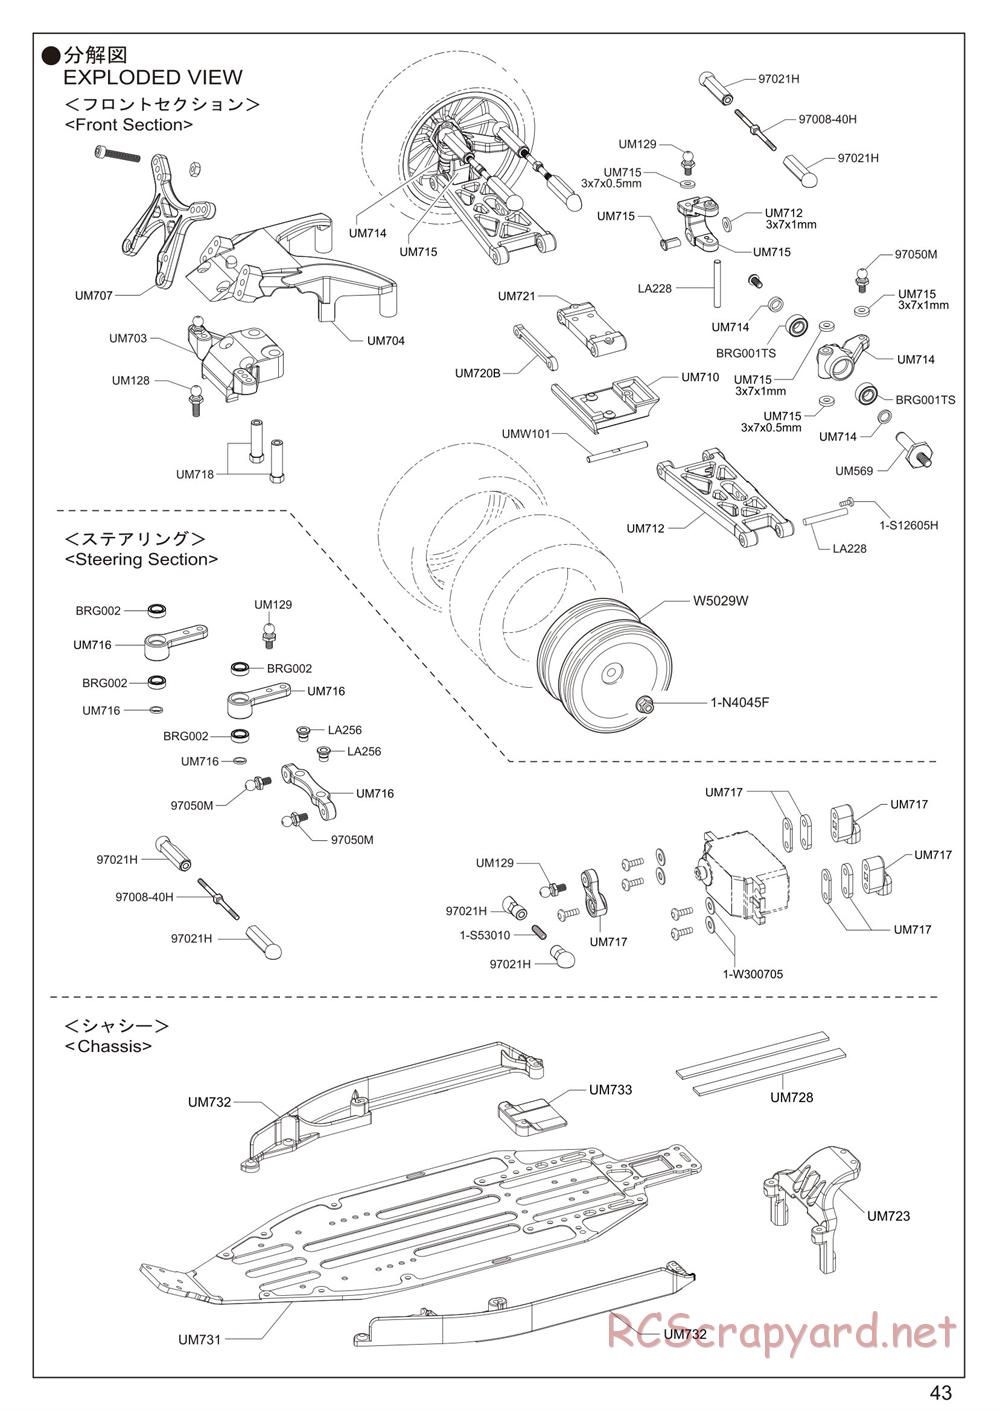 Kyosho - Ultima RB6.6 - Exploded Views - Page 1